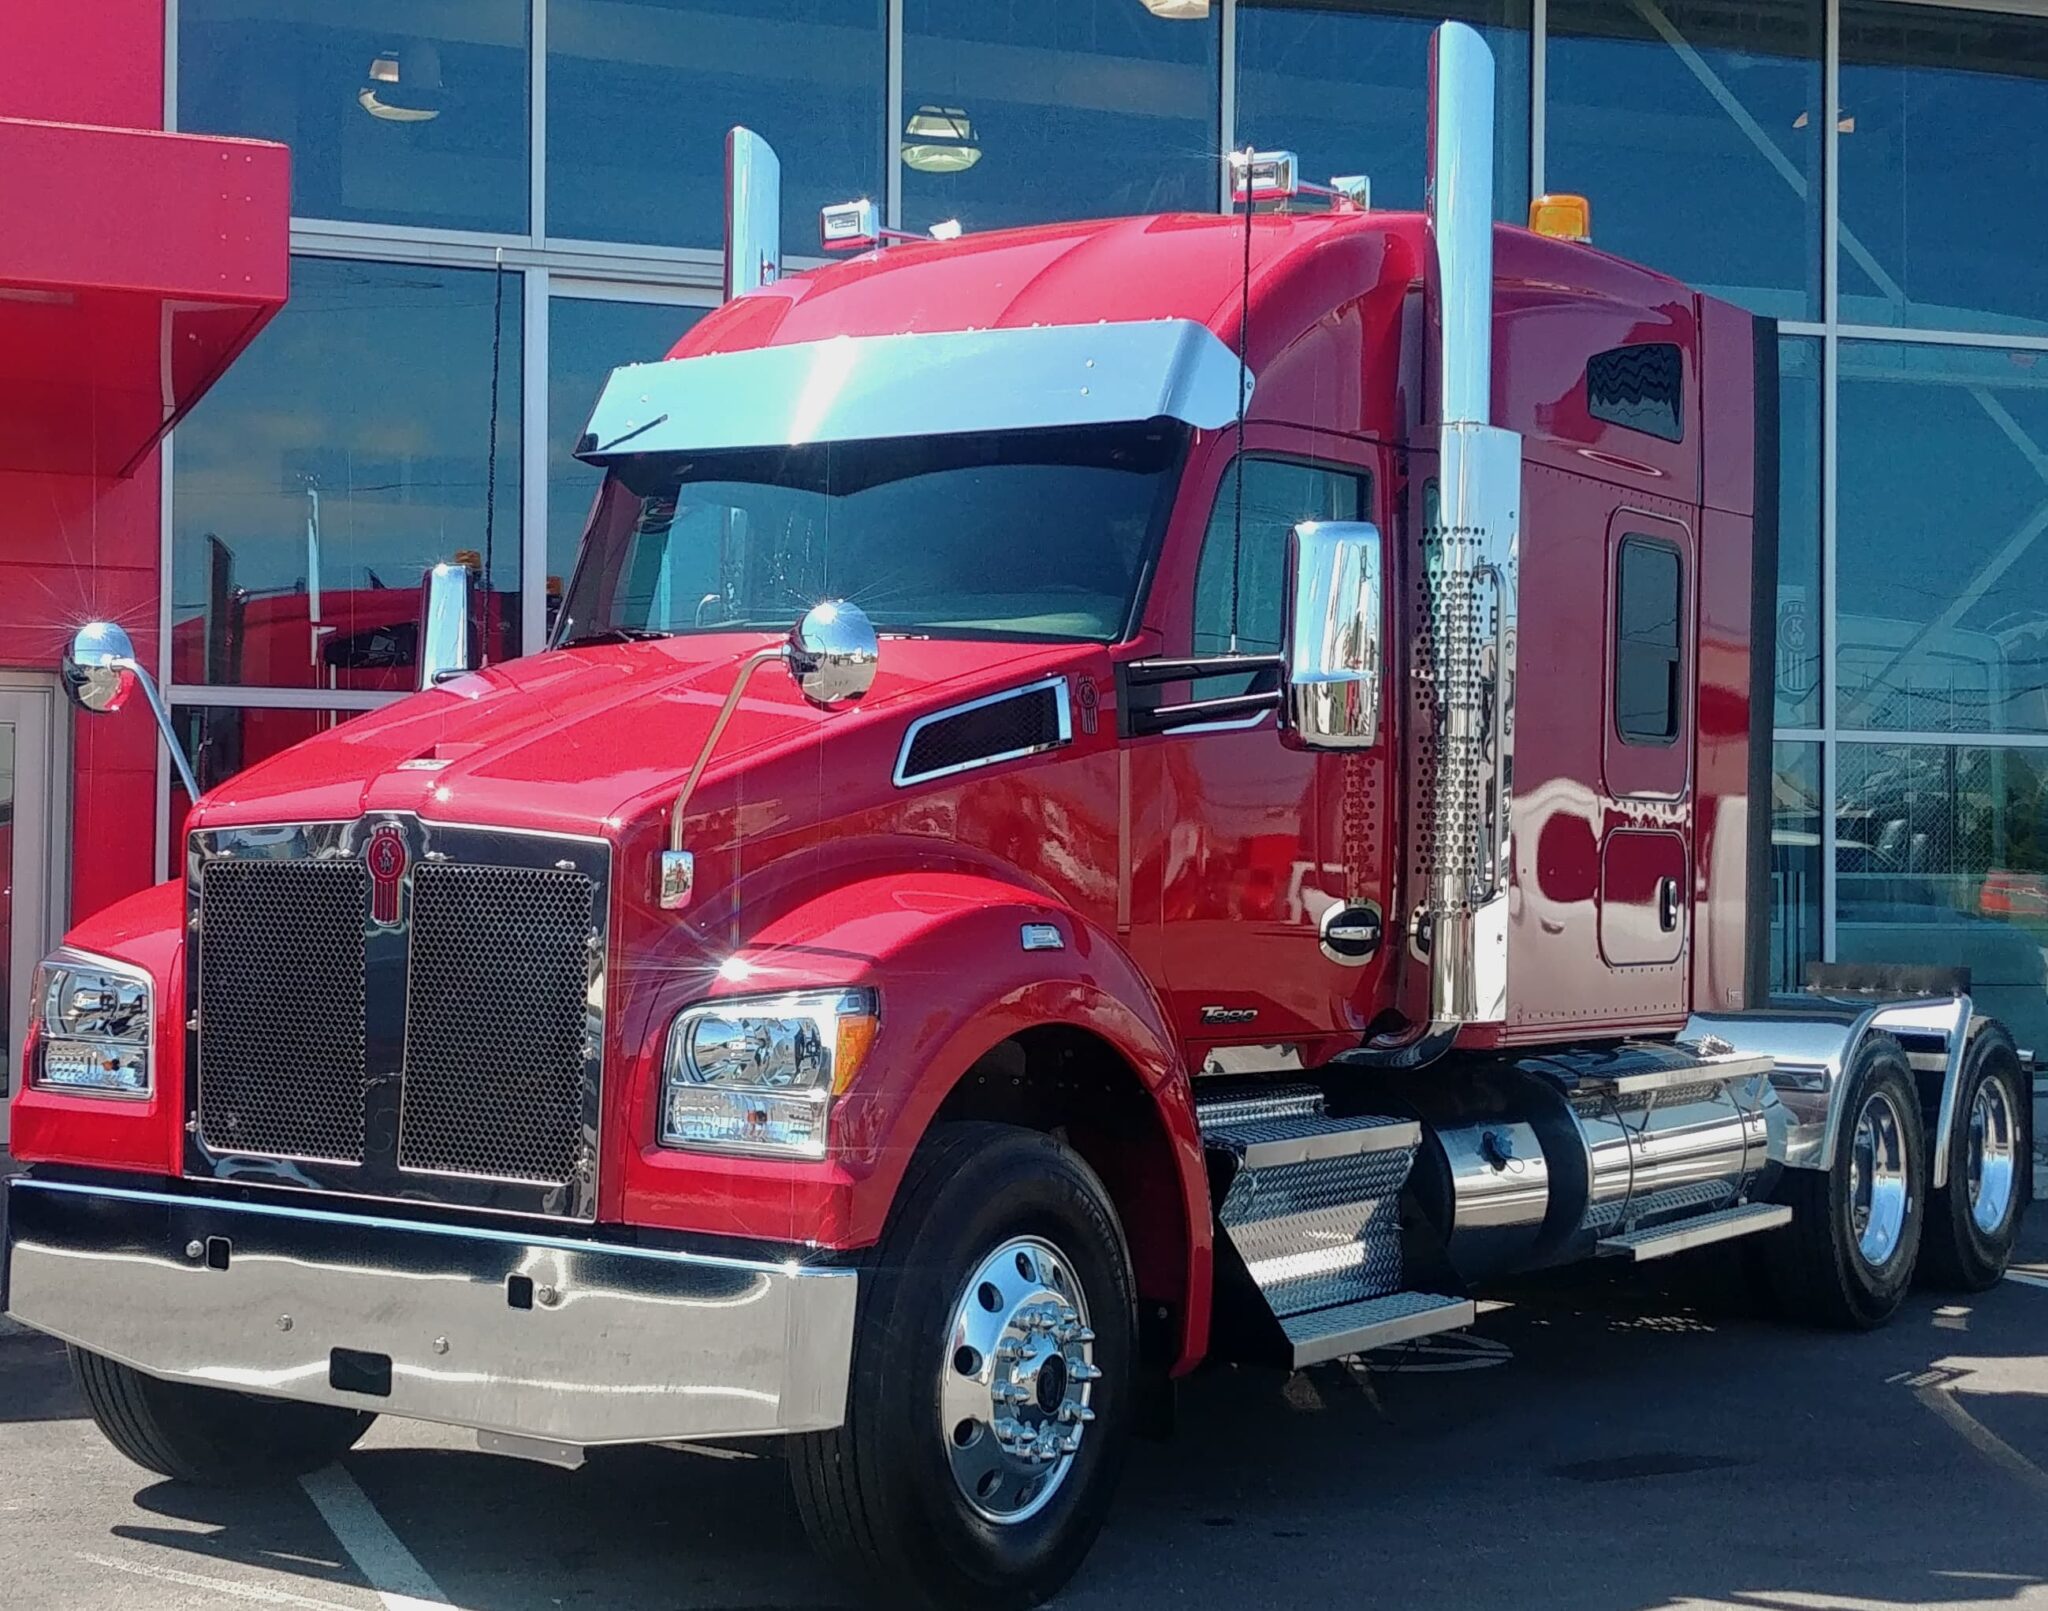 76-Inch Mid-Roof Sleeper Now Available for T680, T880